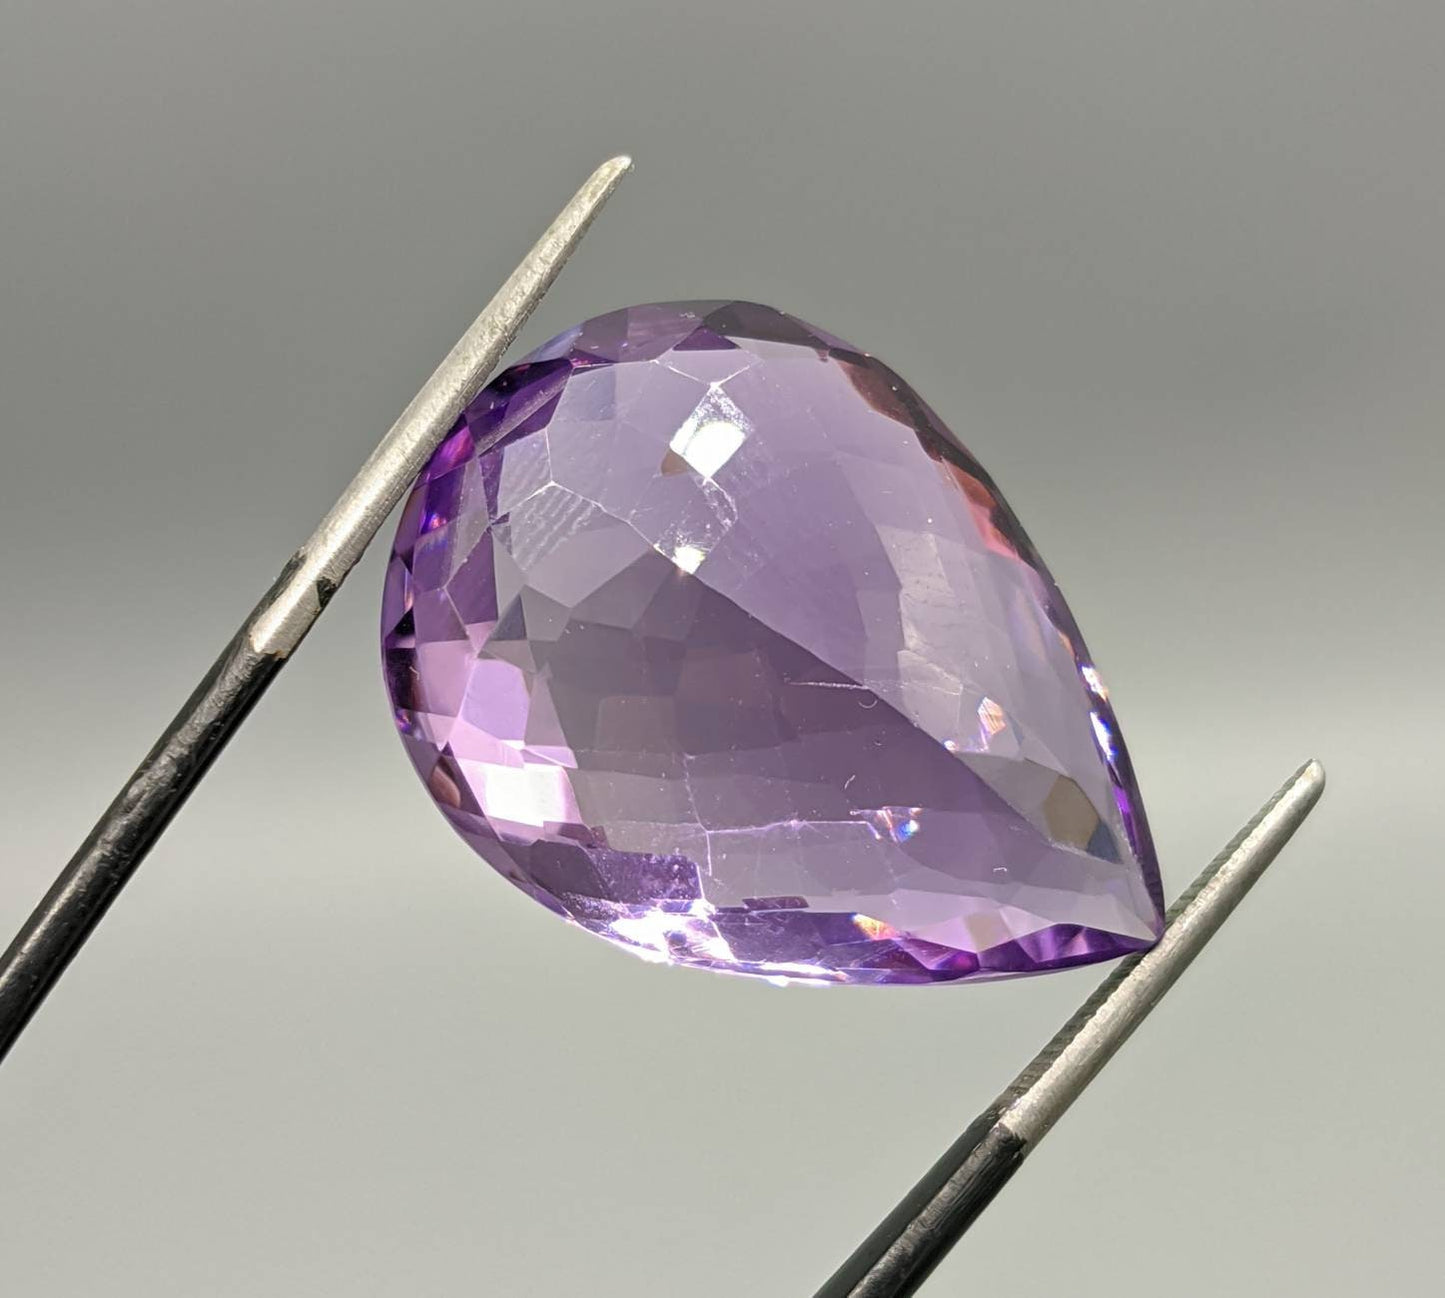 ARSAA GEMS AND MINERALSA natural 26 carats eye clean clarity deep purple color faceted checkerboard shape amethyst gem - Premium  from ARSAA GEMS AND MINERALS - Just $60.00! Shop now at ARSAA GEMS AND MINERALS